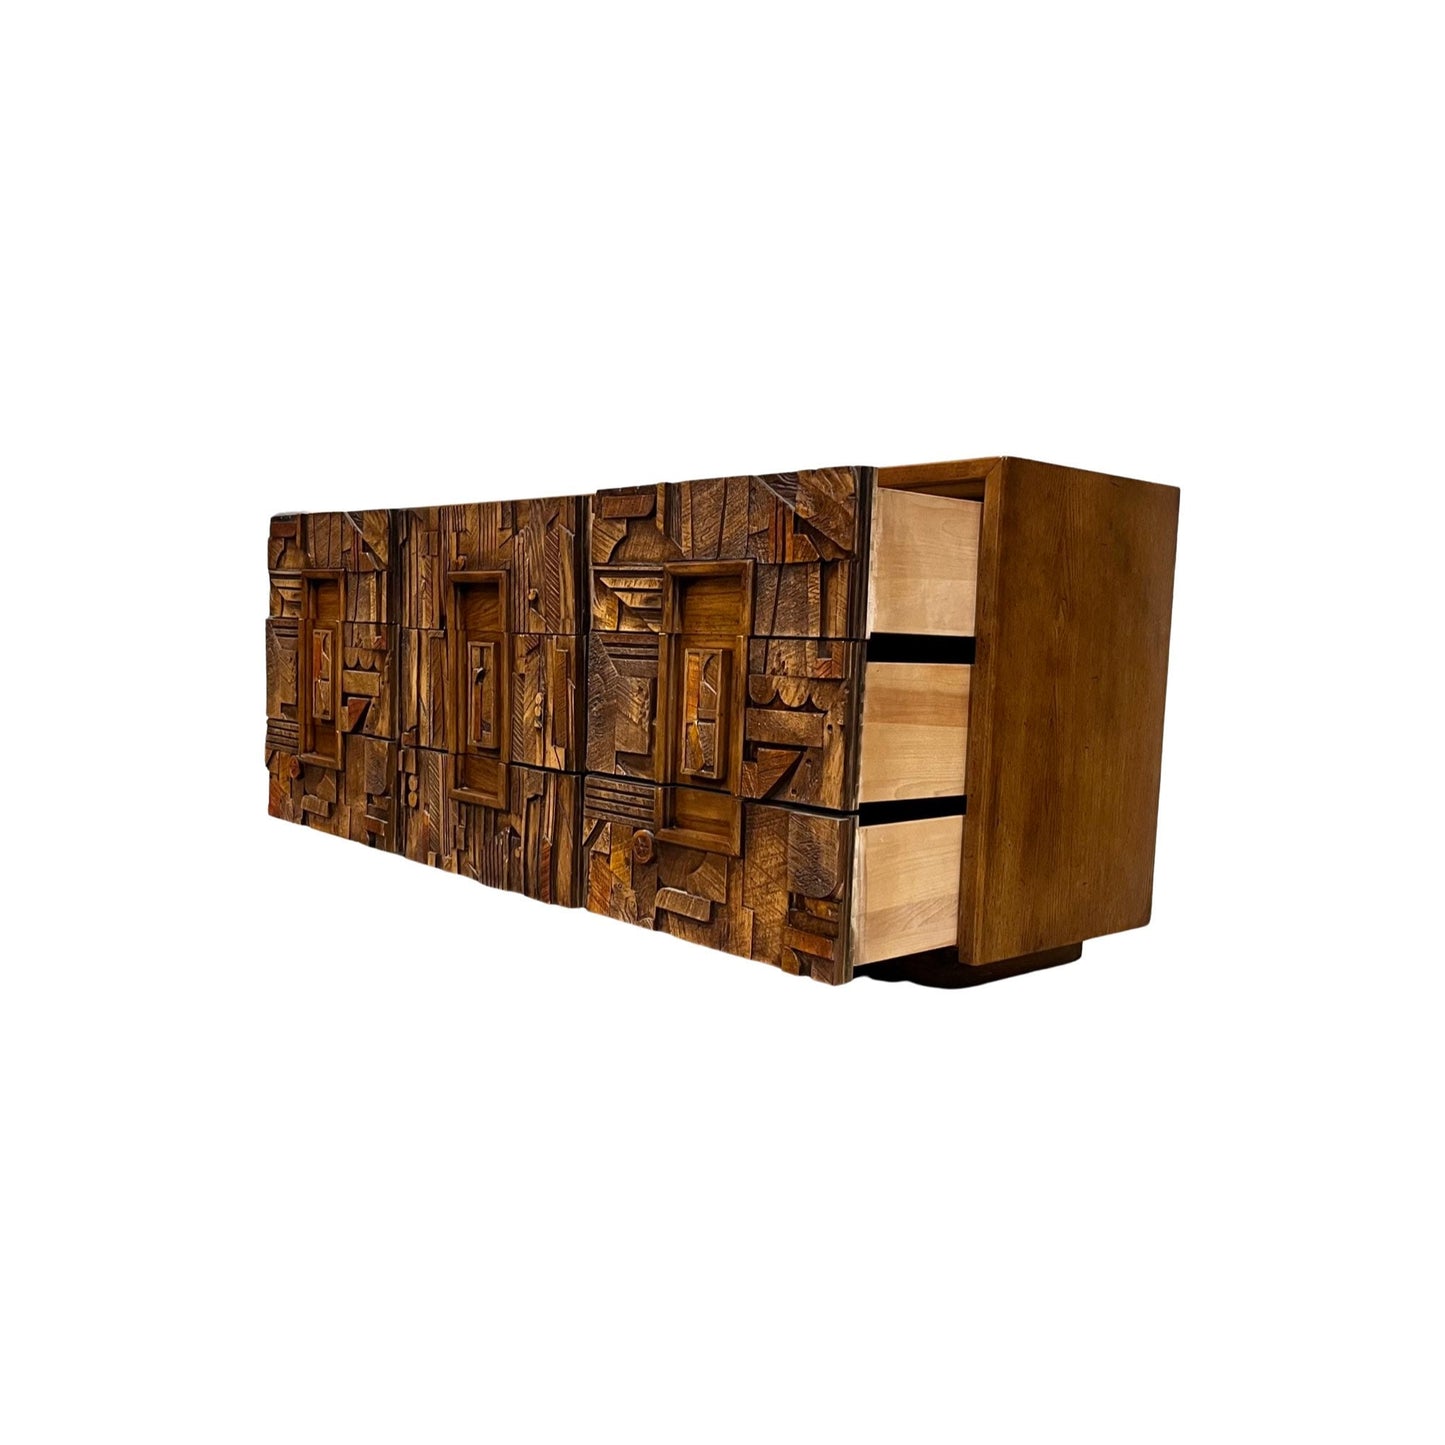 Elevate your home decor with this mid-century modern masterpiece, a 9-drawer lowboy dresser from Lane Furniture's Pueblo line featuring a stunning brutalist pattern on all drawers.